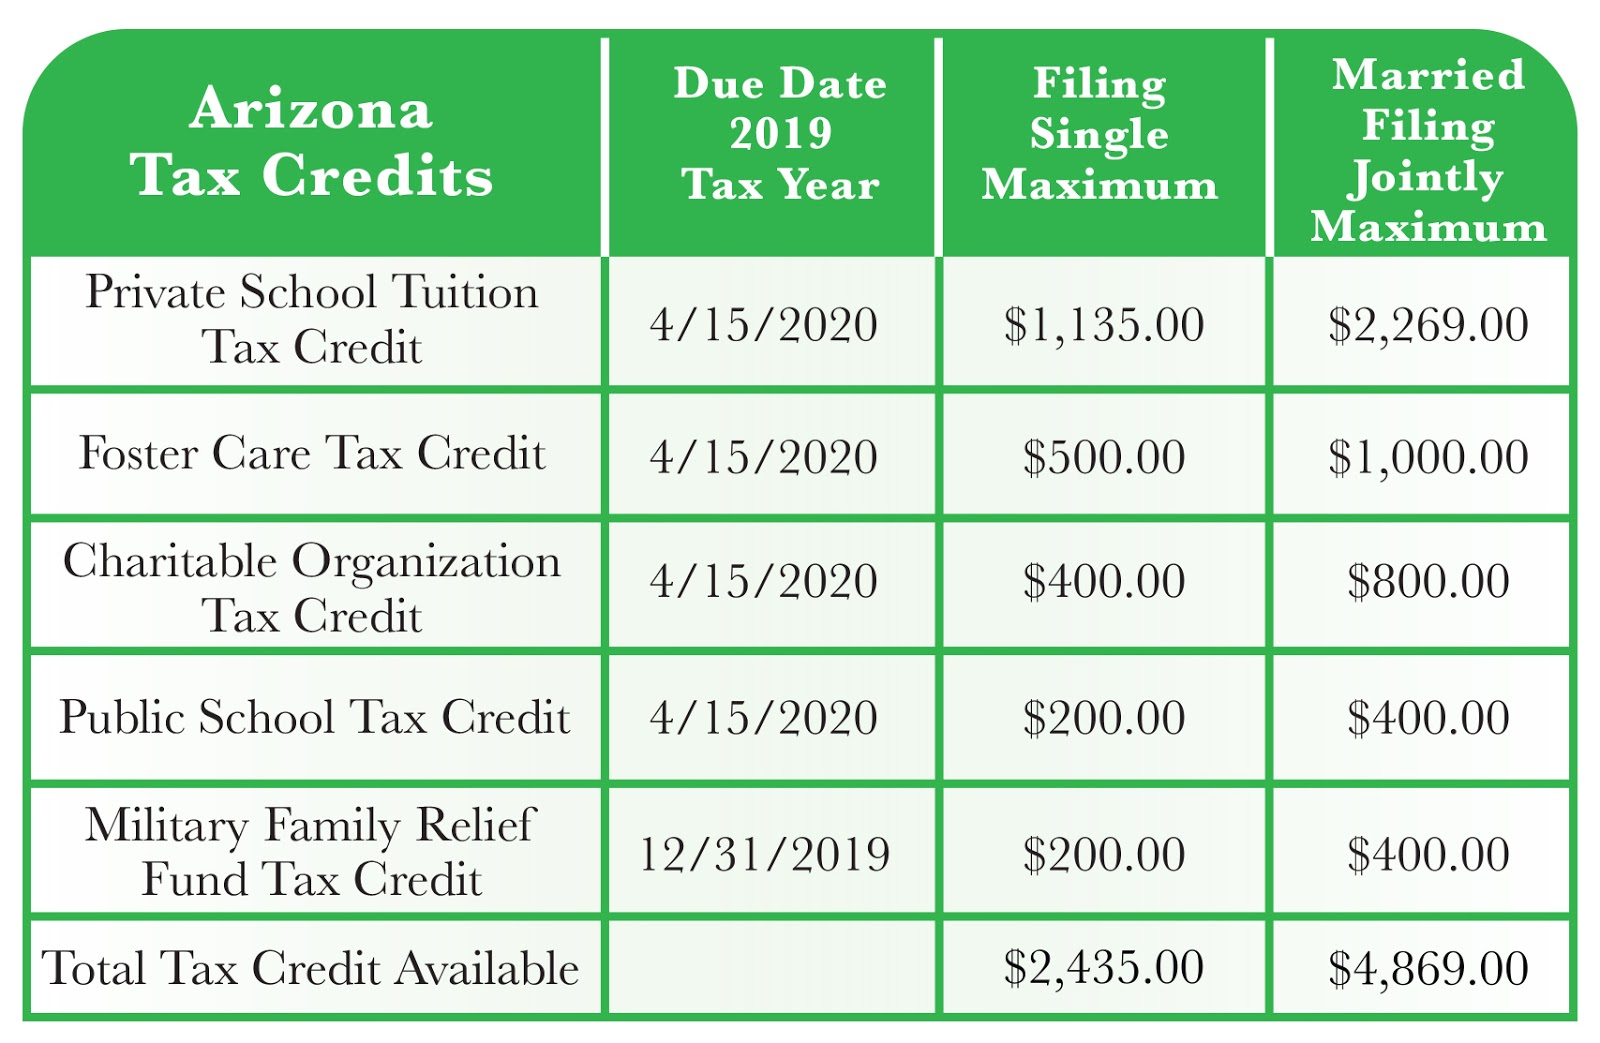 ibe-scholarships-arizona-offers-five-different-tax-credits